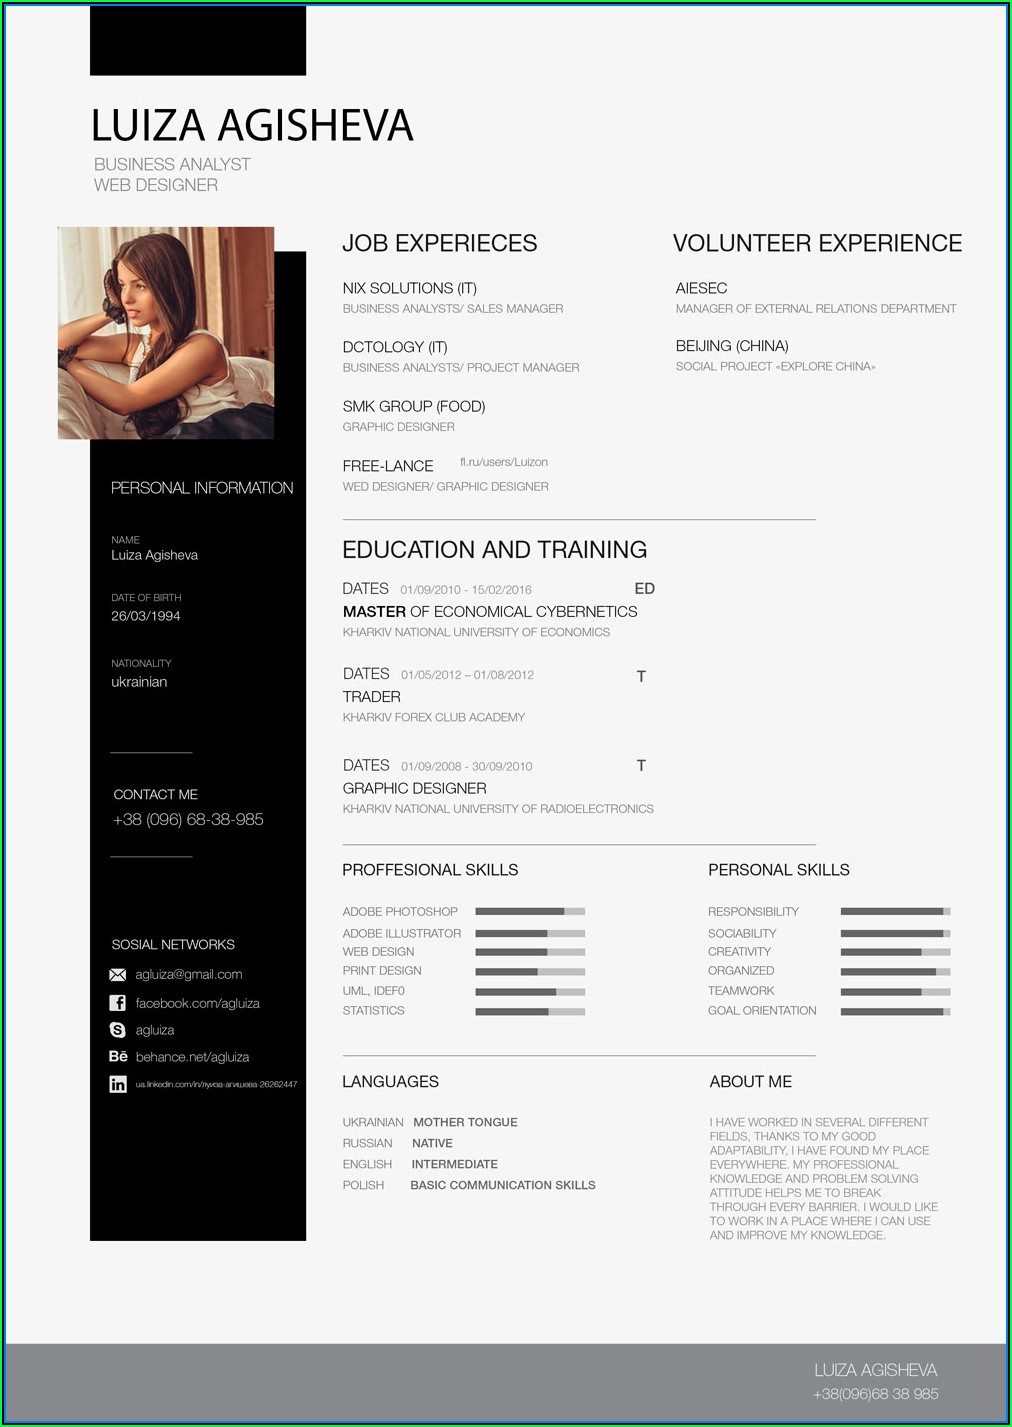 Business Analyst Resume Template Free